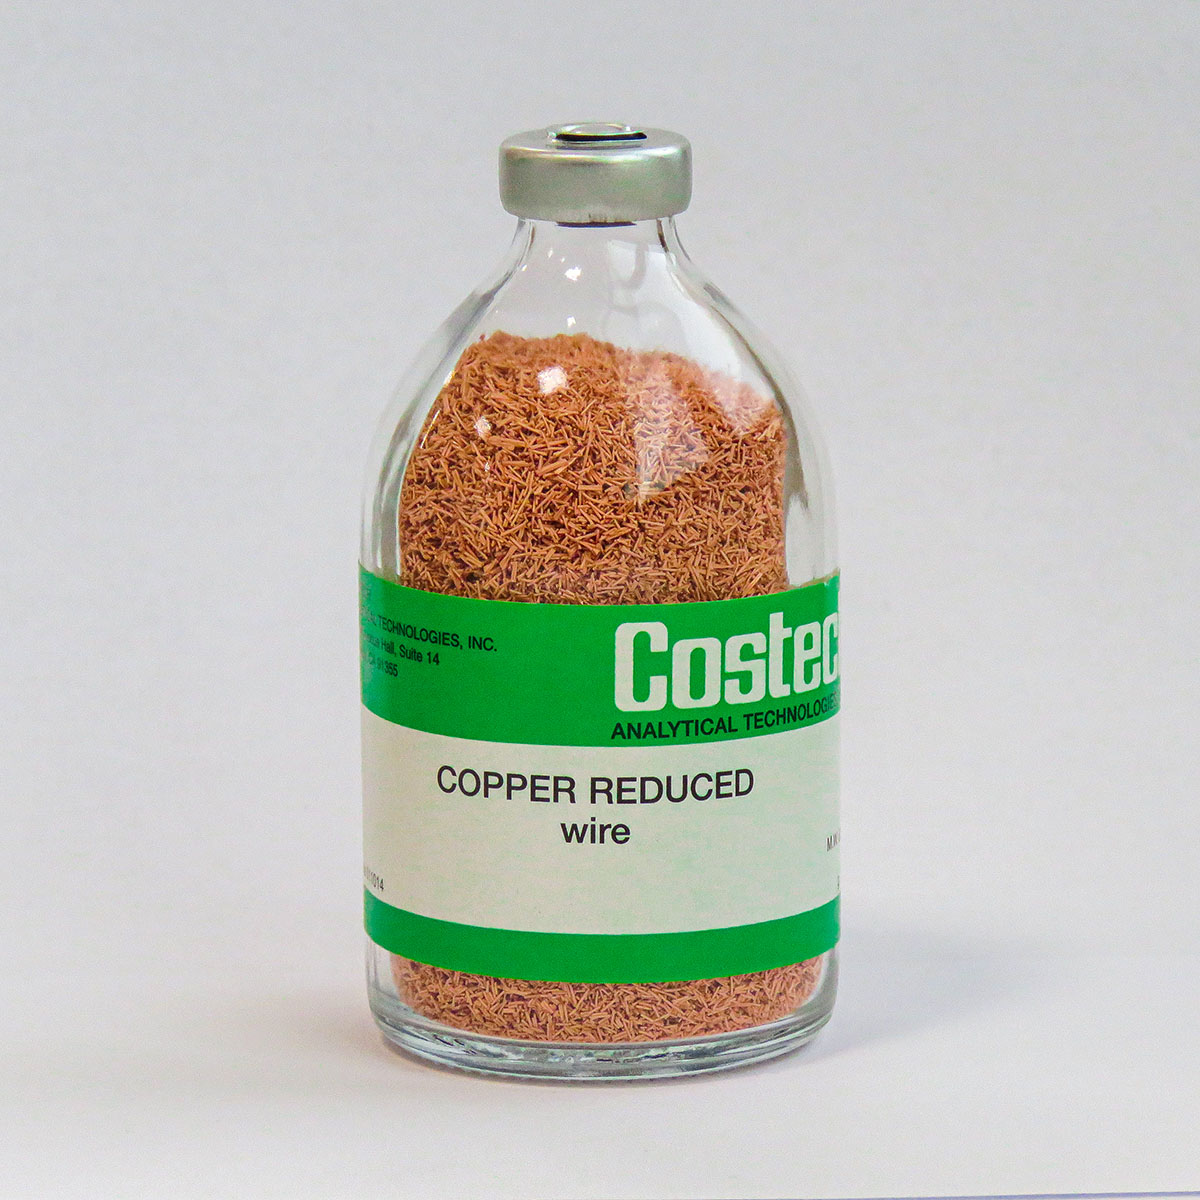 High performance copper catalysts